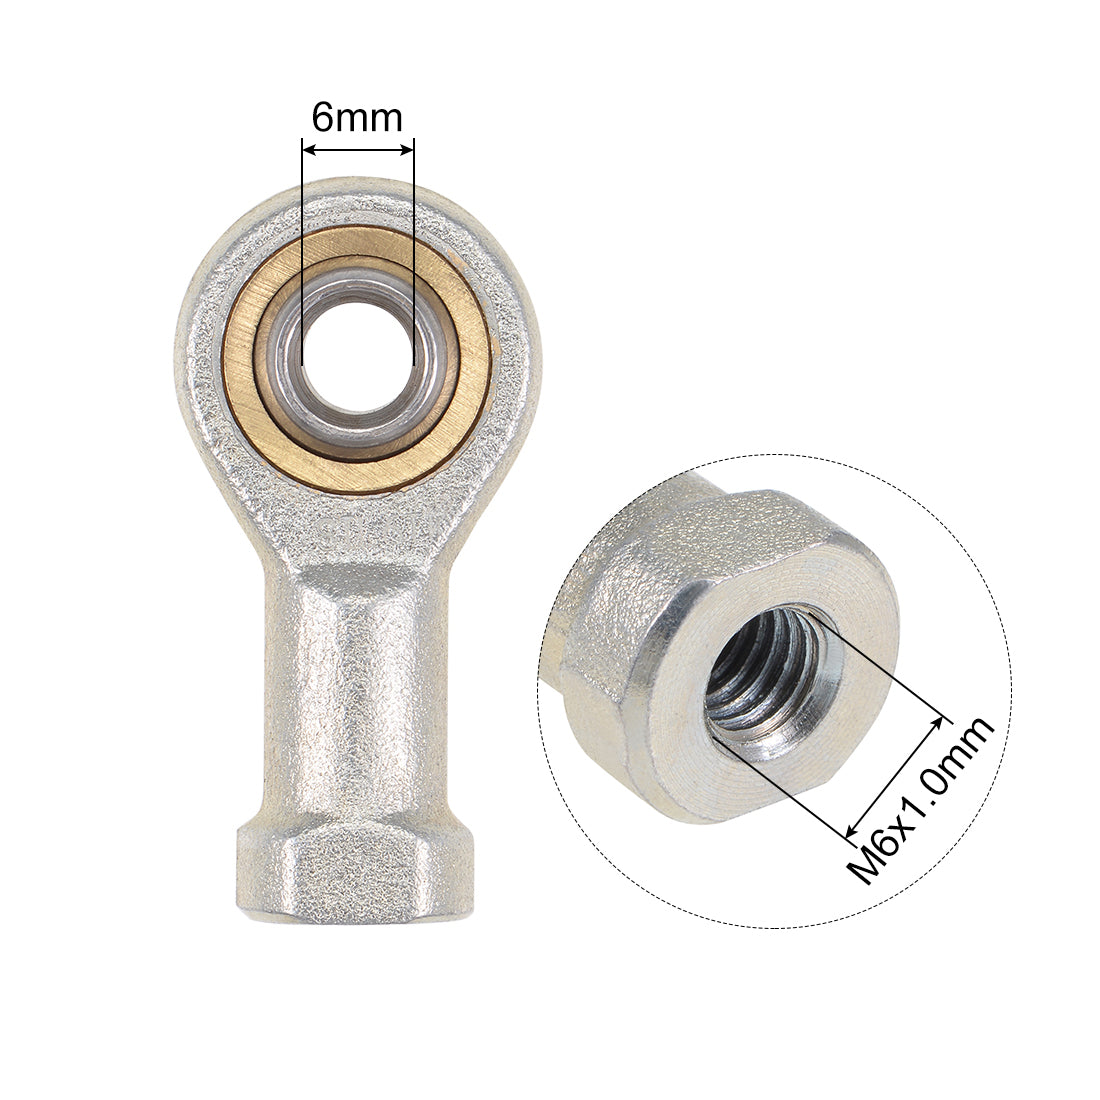 uxcell Uxcell 6mm Rod End Bearing M6x1.0mm Rod Ends Ball Joint Female Left Hand Thread 4pcs